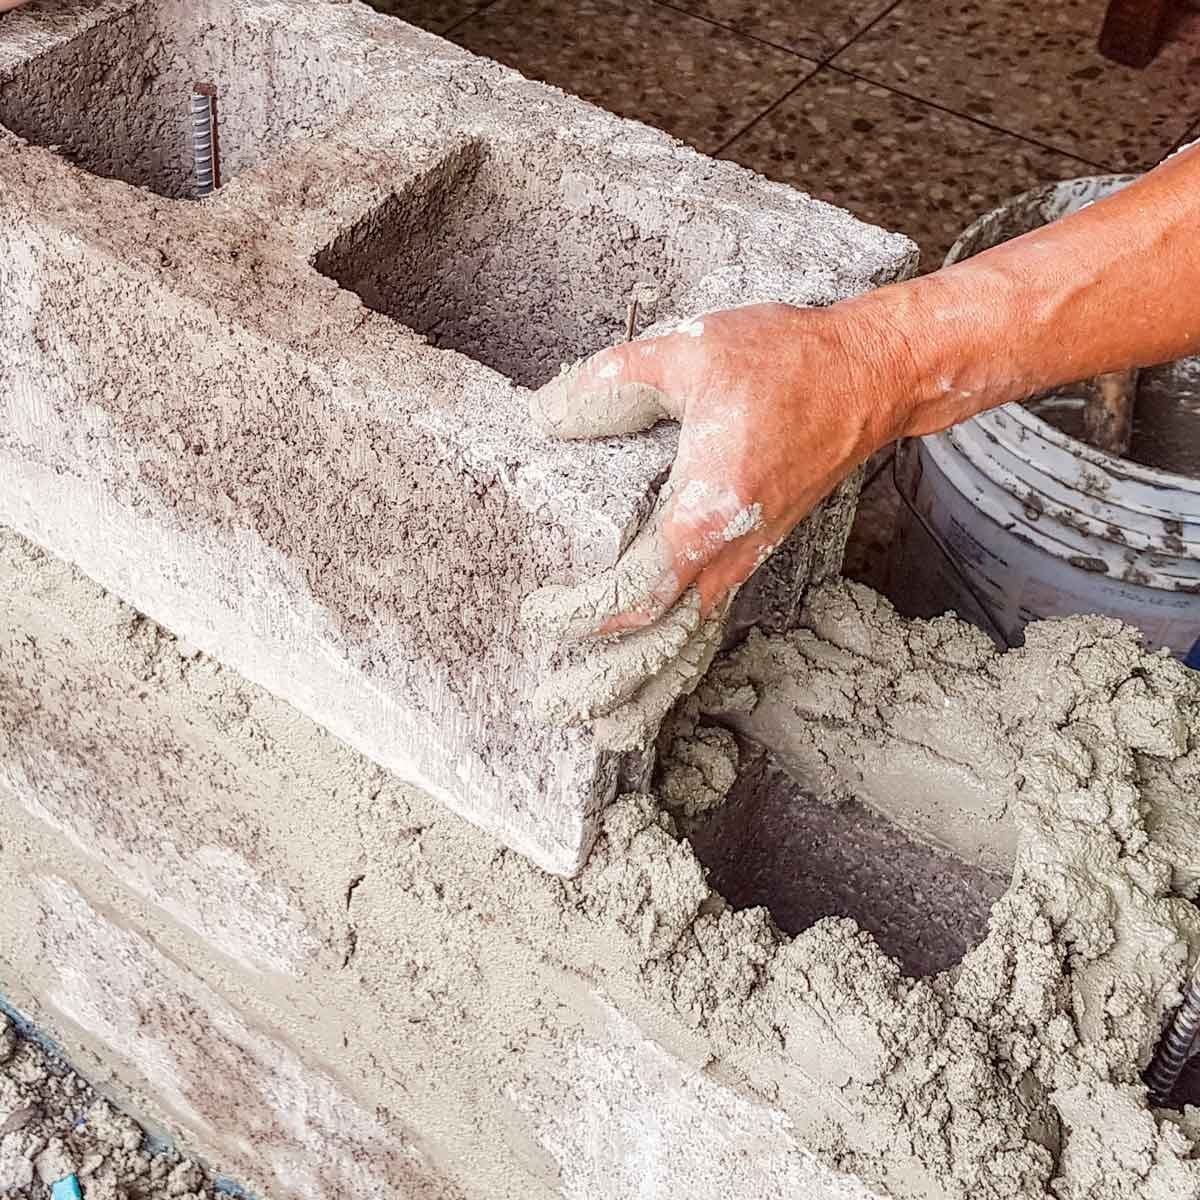 10 Tips for Working With Concrete